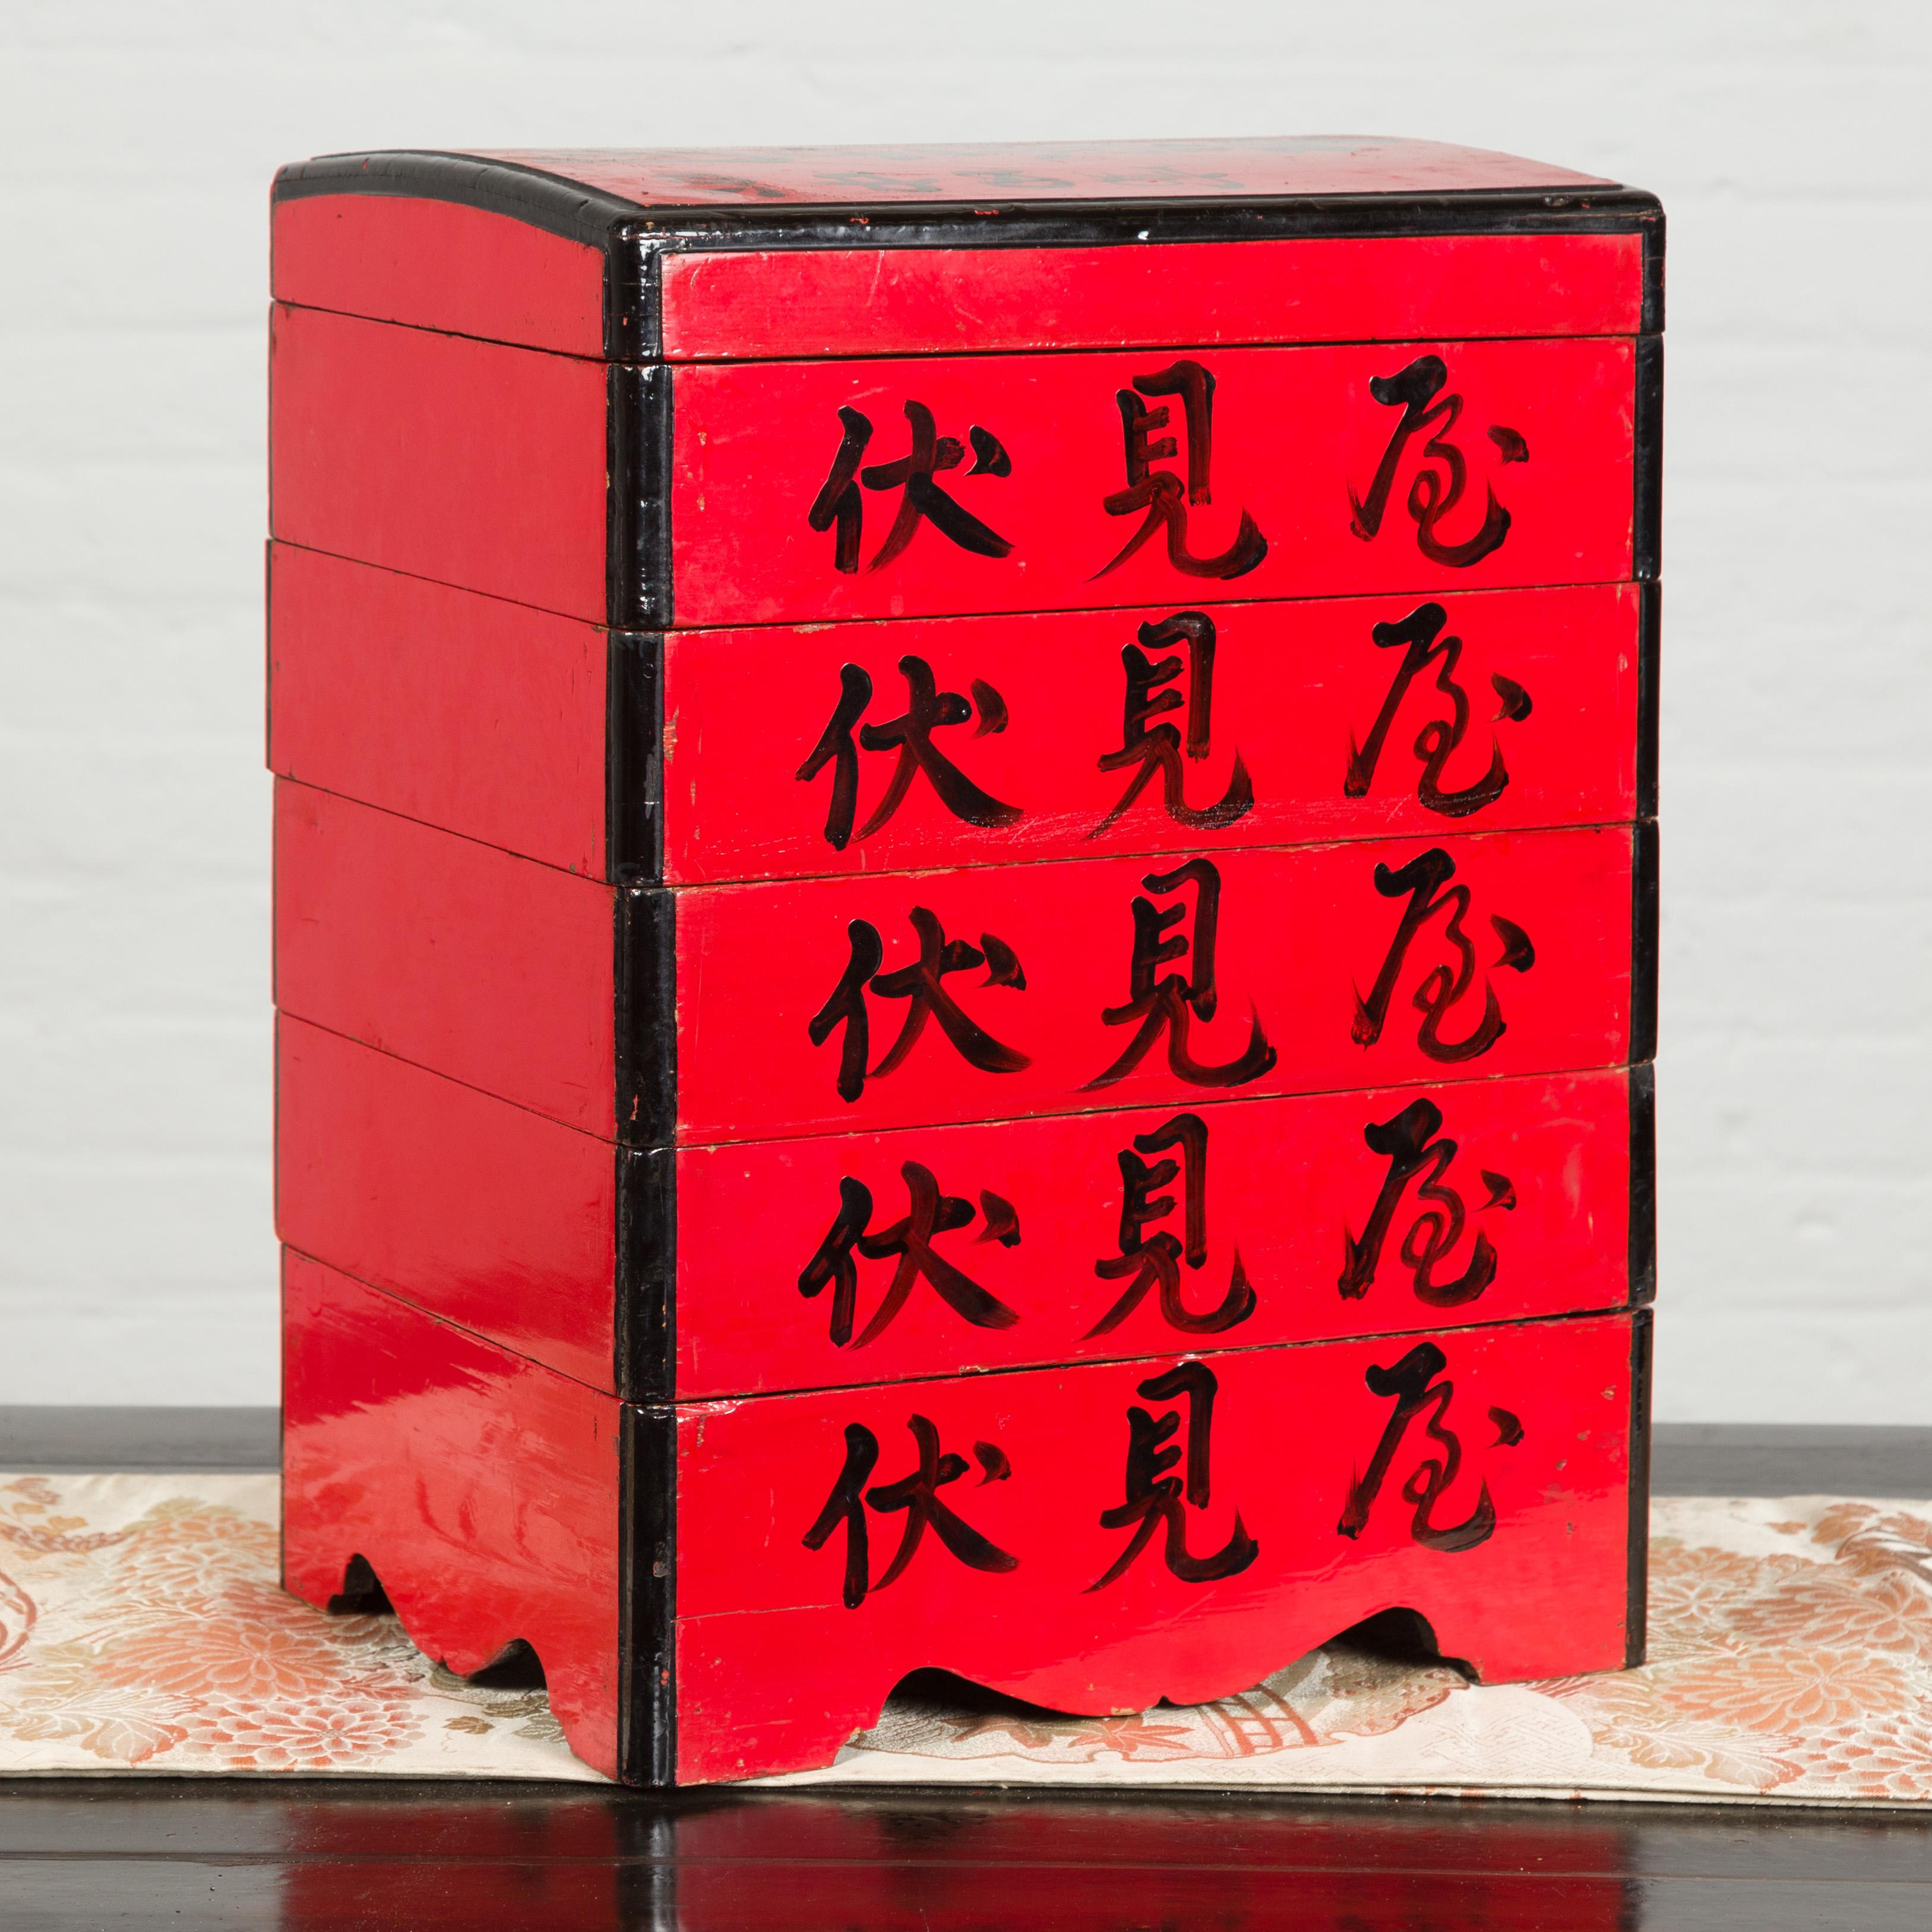 A Japanese Taisho period tiered food box from the early 20th century with red lacquer and calligraphy. Created in Japan during the early years of the 20th century, this red lacquered food box showcases an arching lid sitting above five individual